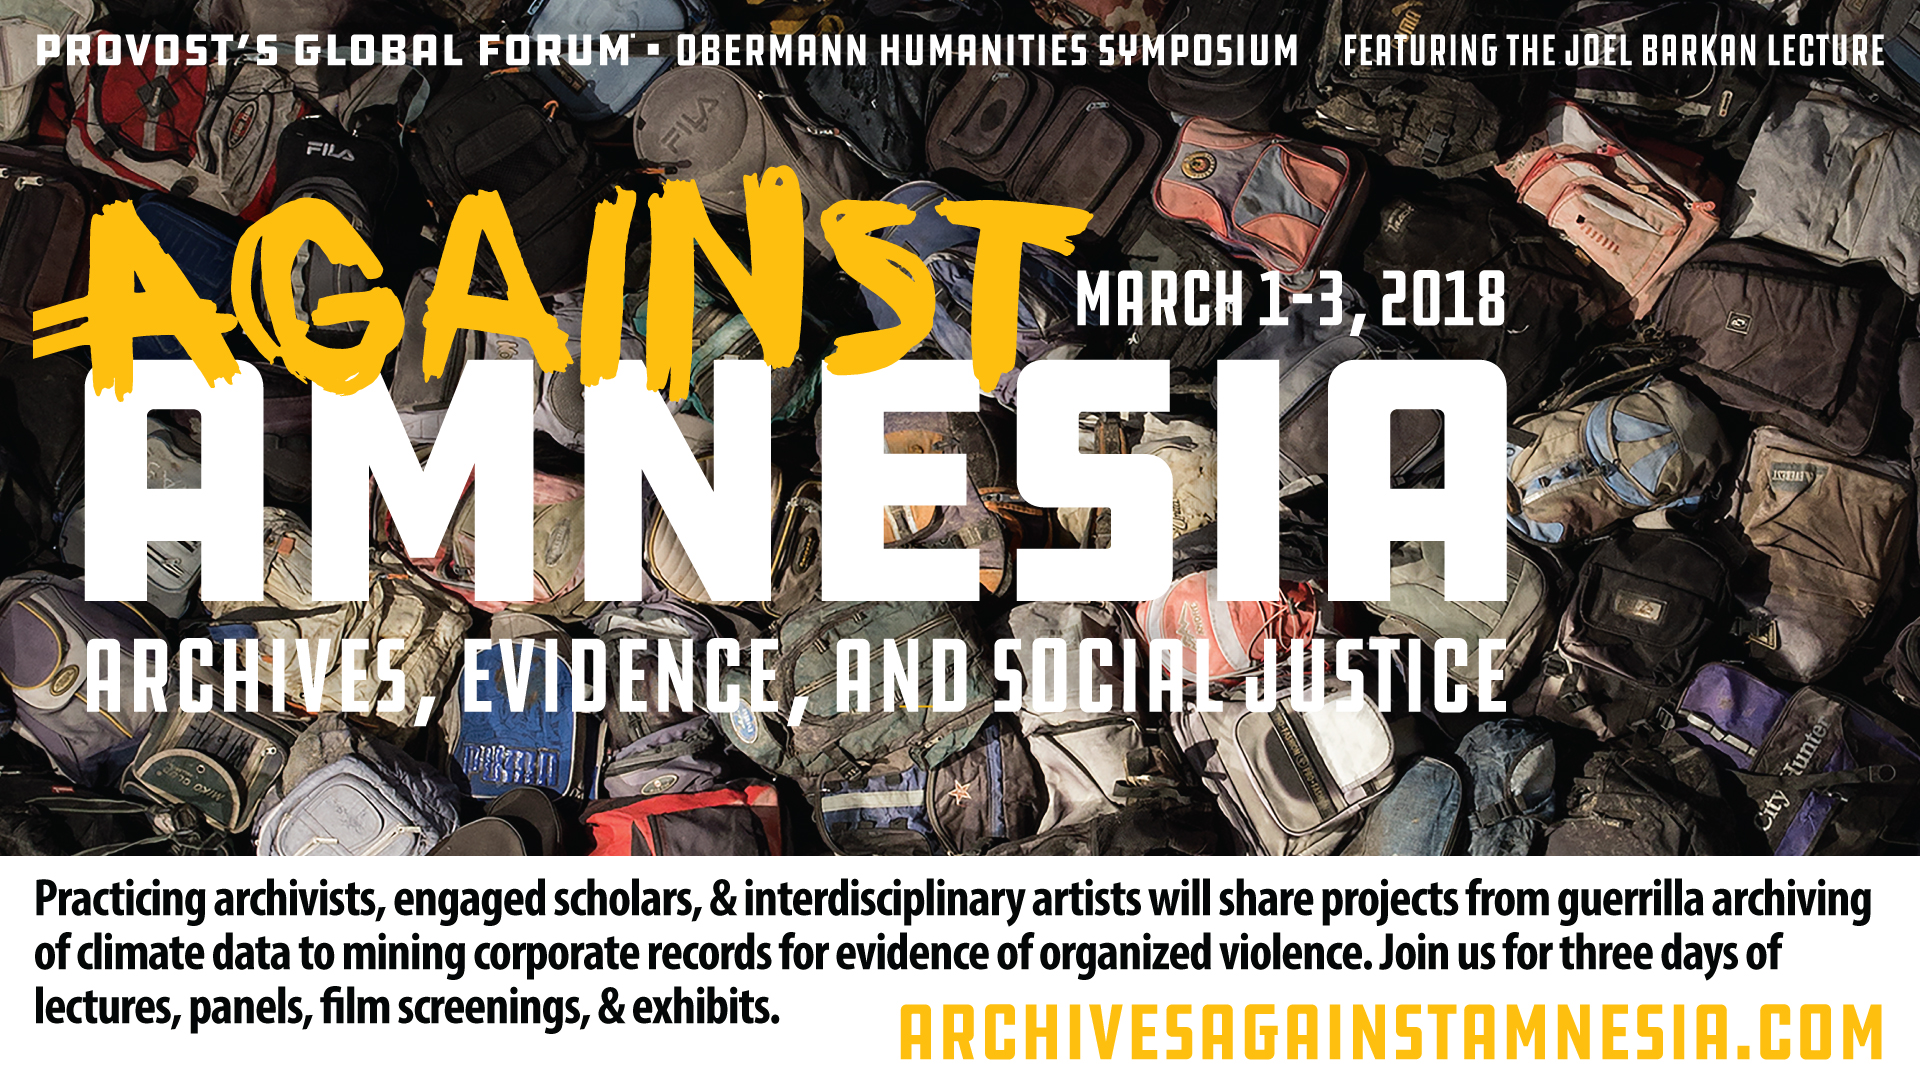 Provost's Global Forum - Obermann Humanities Symposium - Feature the Joel Barkan Lecture, Against Amnesia, March 1-3, 2018, Archives, Evidence, and Social Justice.  Practicing archivists, engaged scholars, and interdisciplinary artists will share projects from guerrilla archiving of climate data to mining corporate records for evidence of organized violence. Join us for three days of lectures, panels, film screenings, and exhibits. Archivesagainstamnesia.com